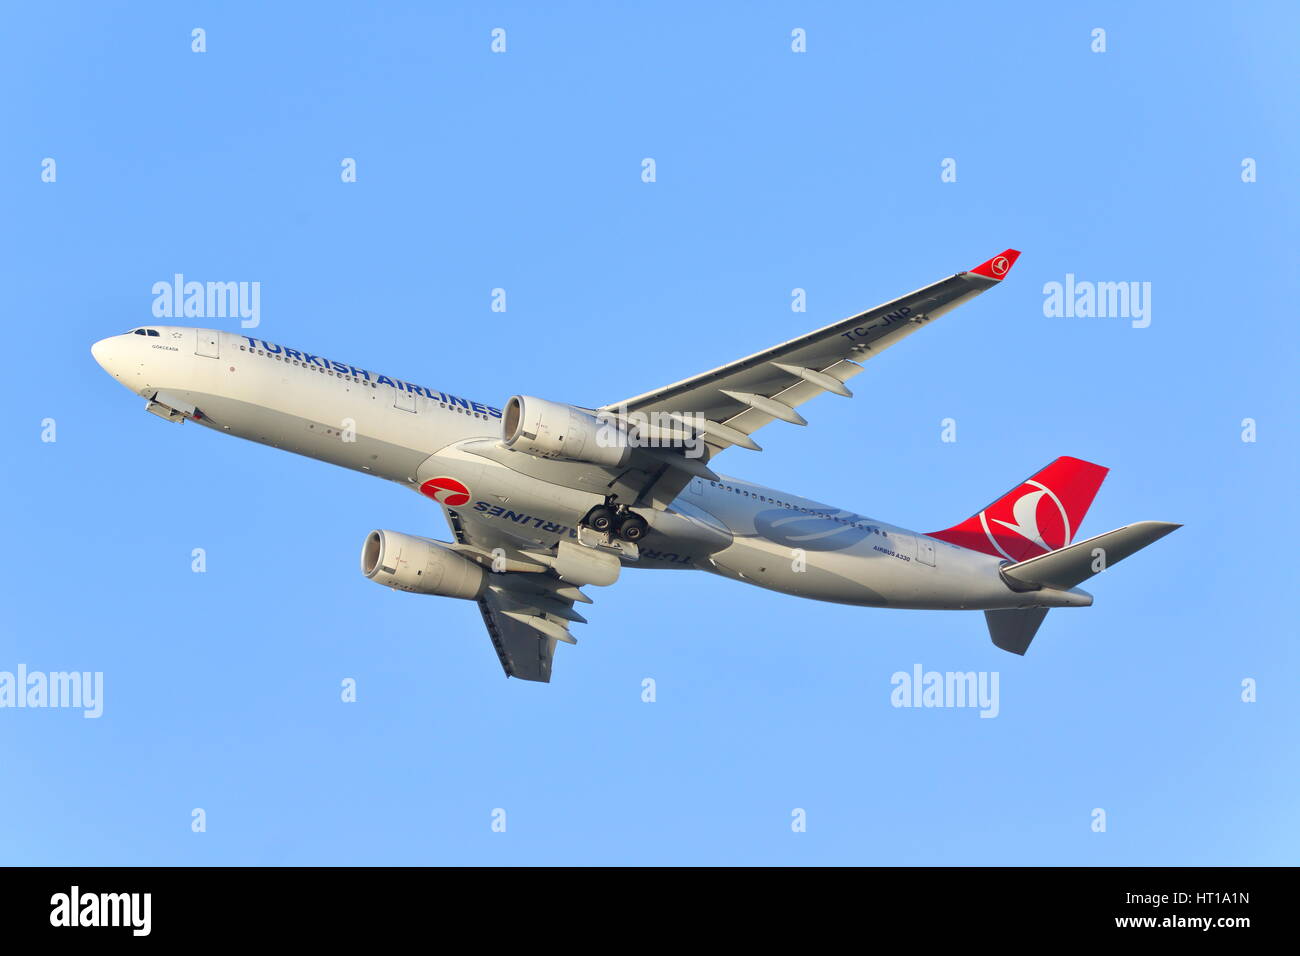 Turkish Airlines Airbus A330 TC-JNP departing from London Heathrow Airport, UK Stock Photo